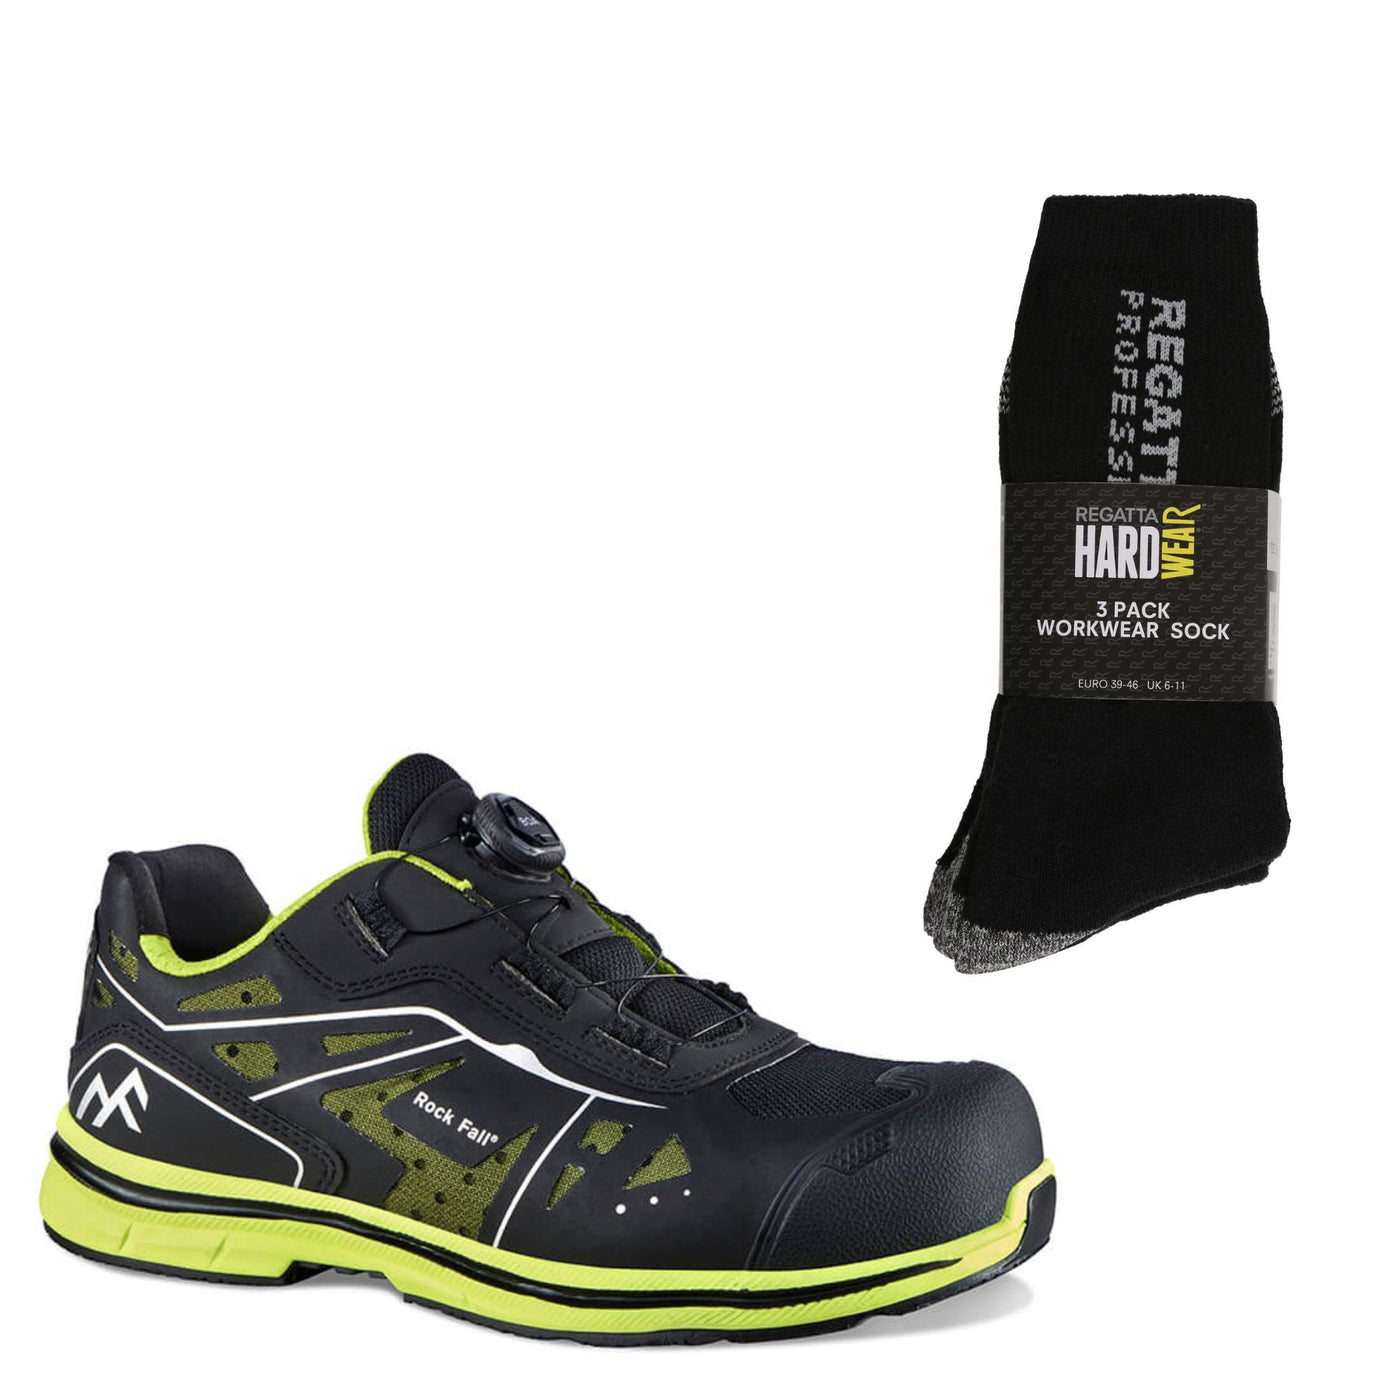 RockFall RF110 Special Offer Pack - ESD AirTech BOA Safety Trainers + 3 Pairs Work Socks